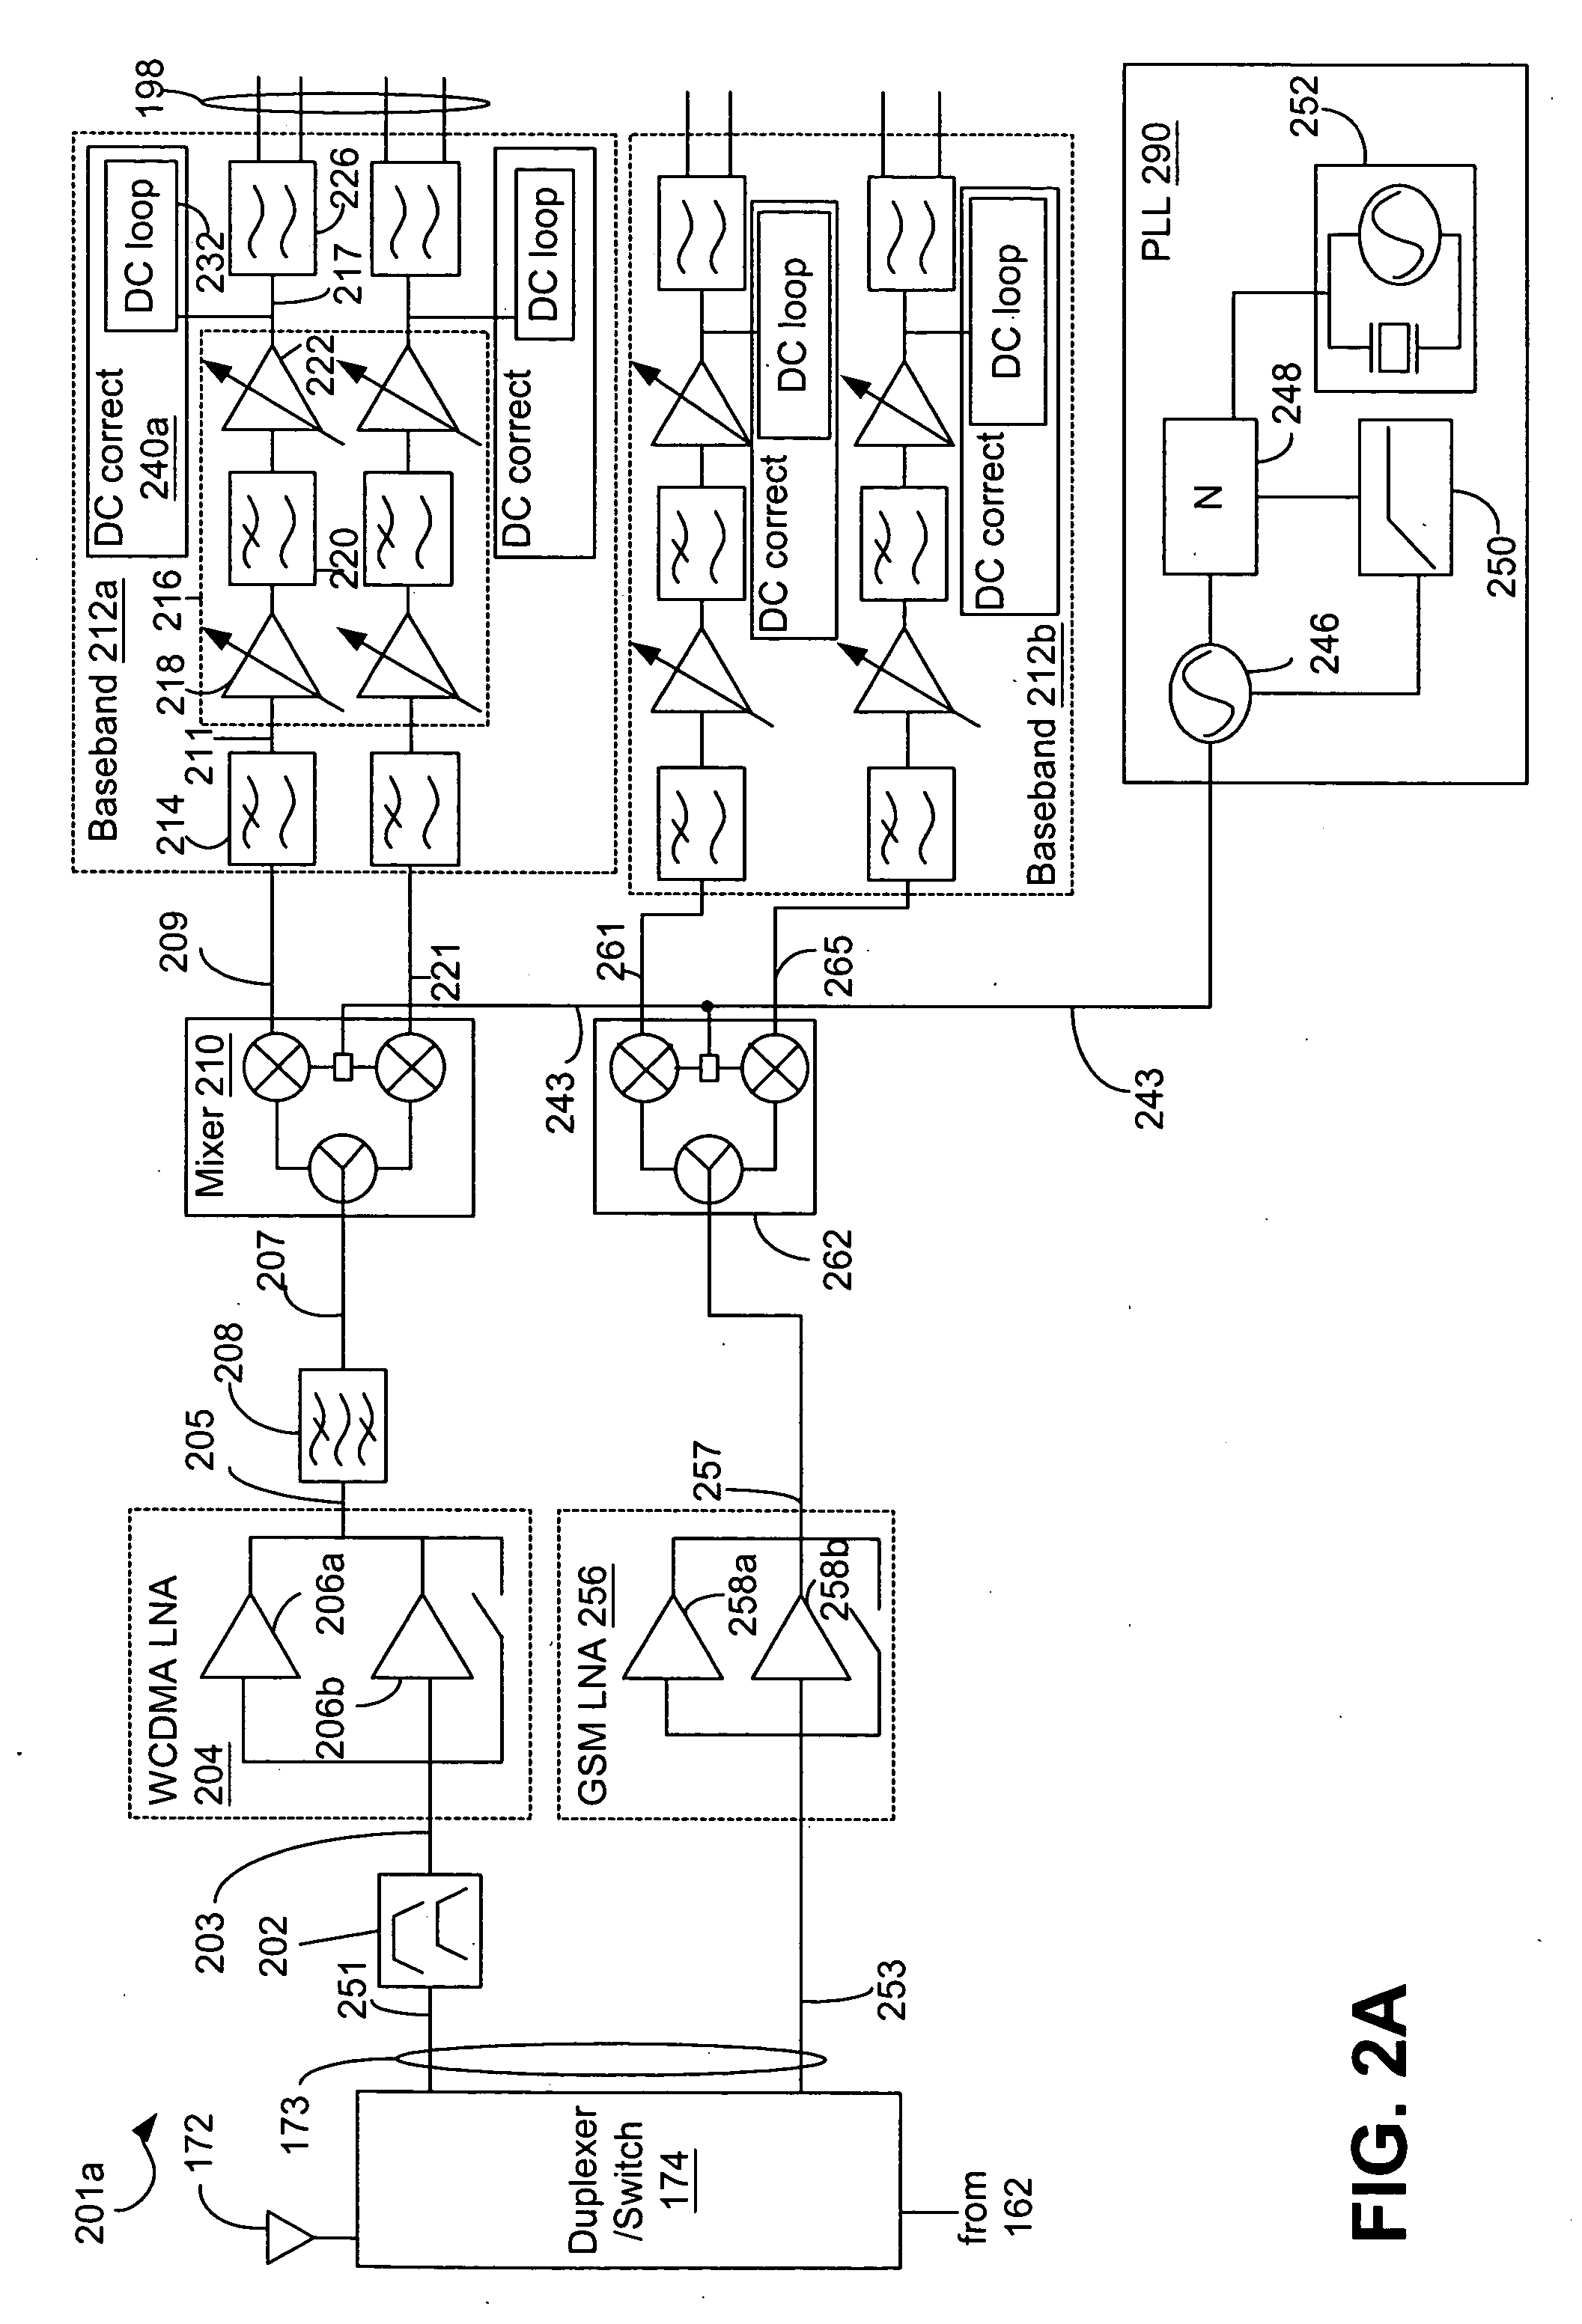 Direct current offset correction systems and methods